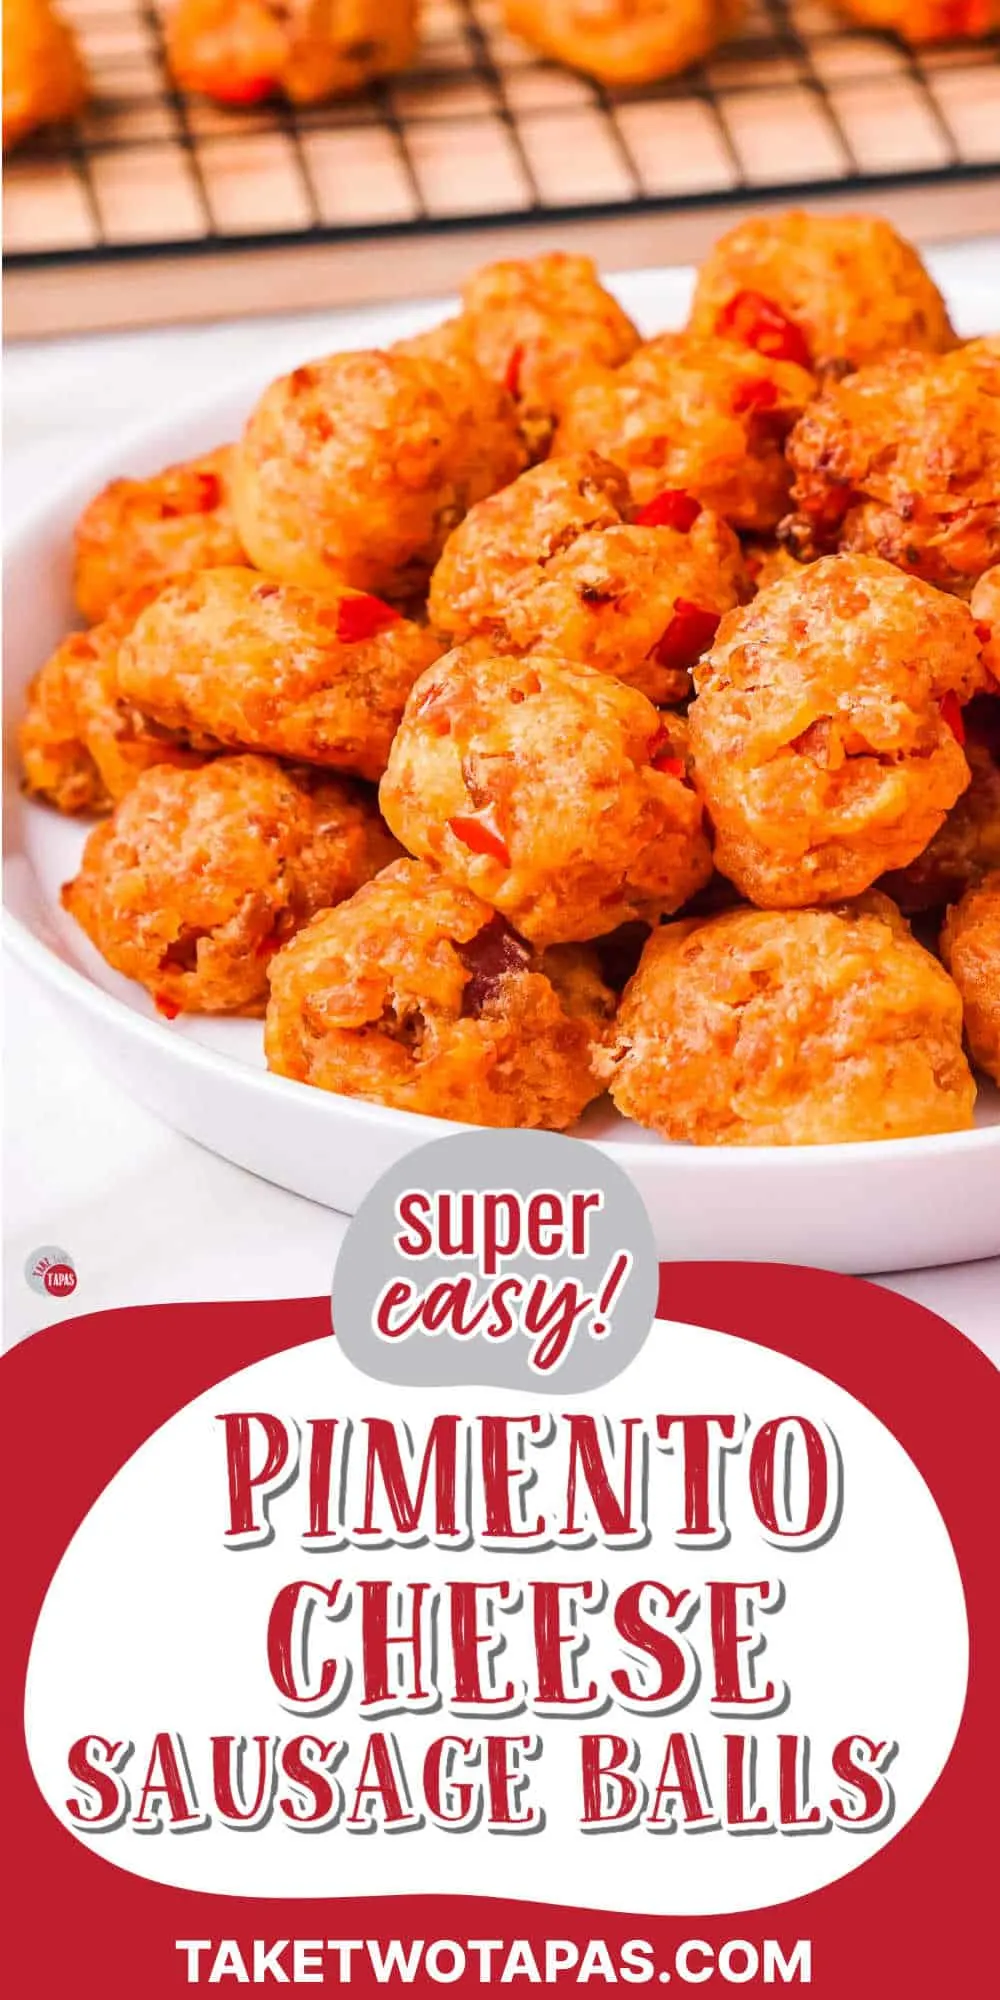 sausage ball recipe with pimiento cheese and a red banner with text